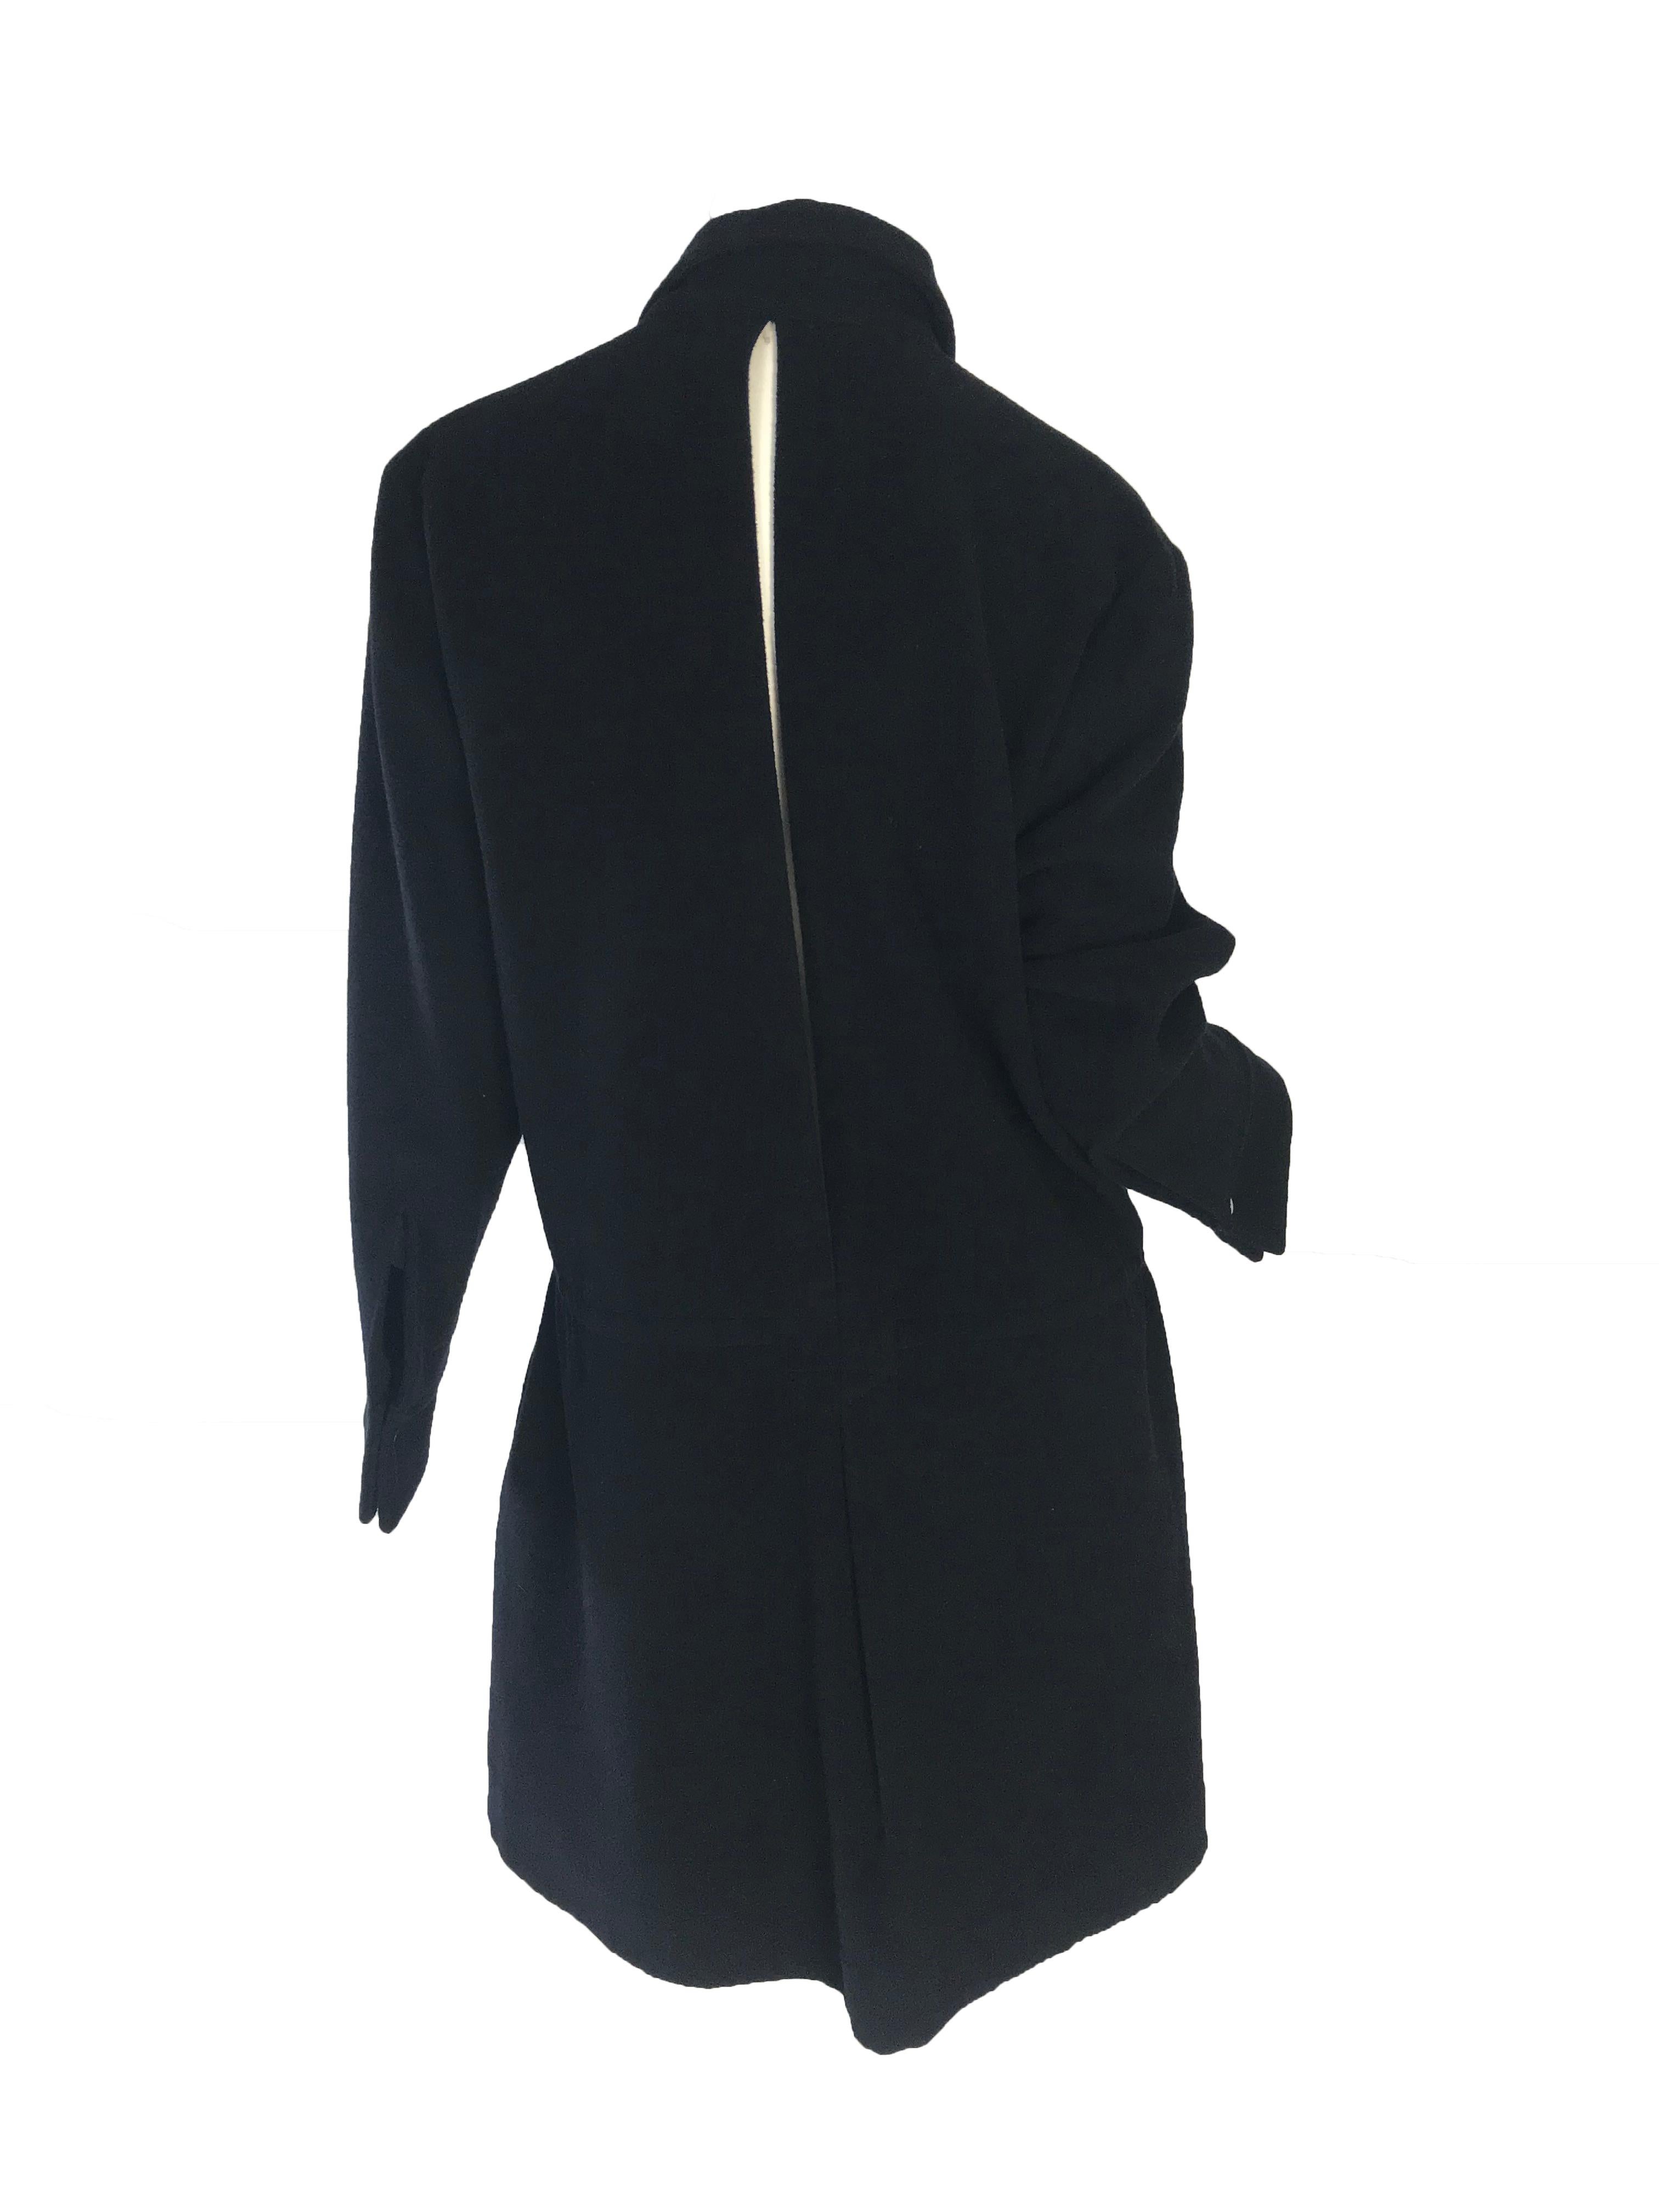 1990s Yohji Yamamoto navy fleece dress with clash at back. Condition: Good, some moth bites. 

Size 2 ( mannequin is US size 6 ) 